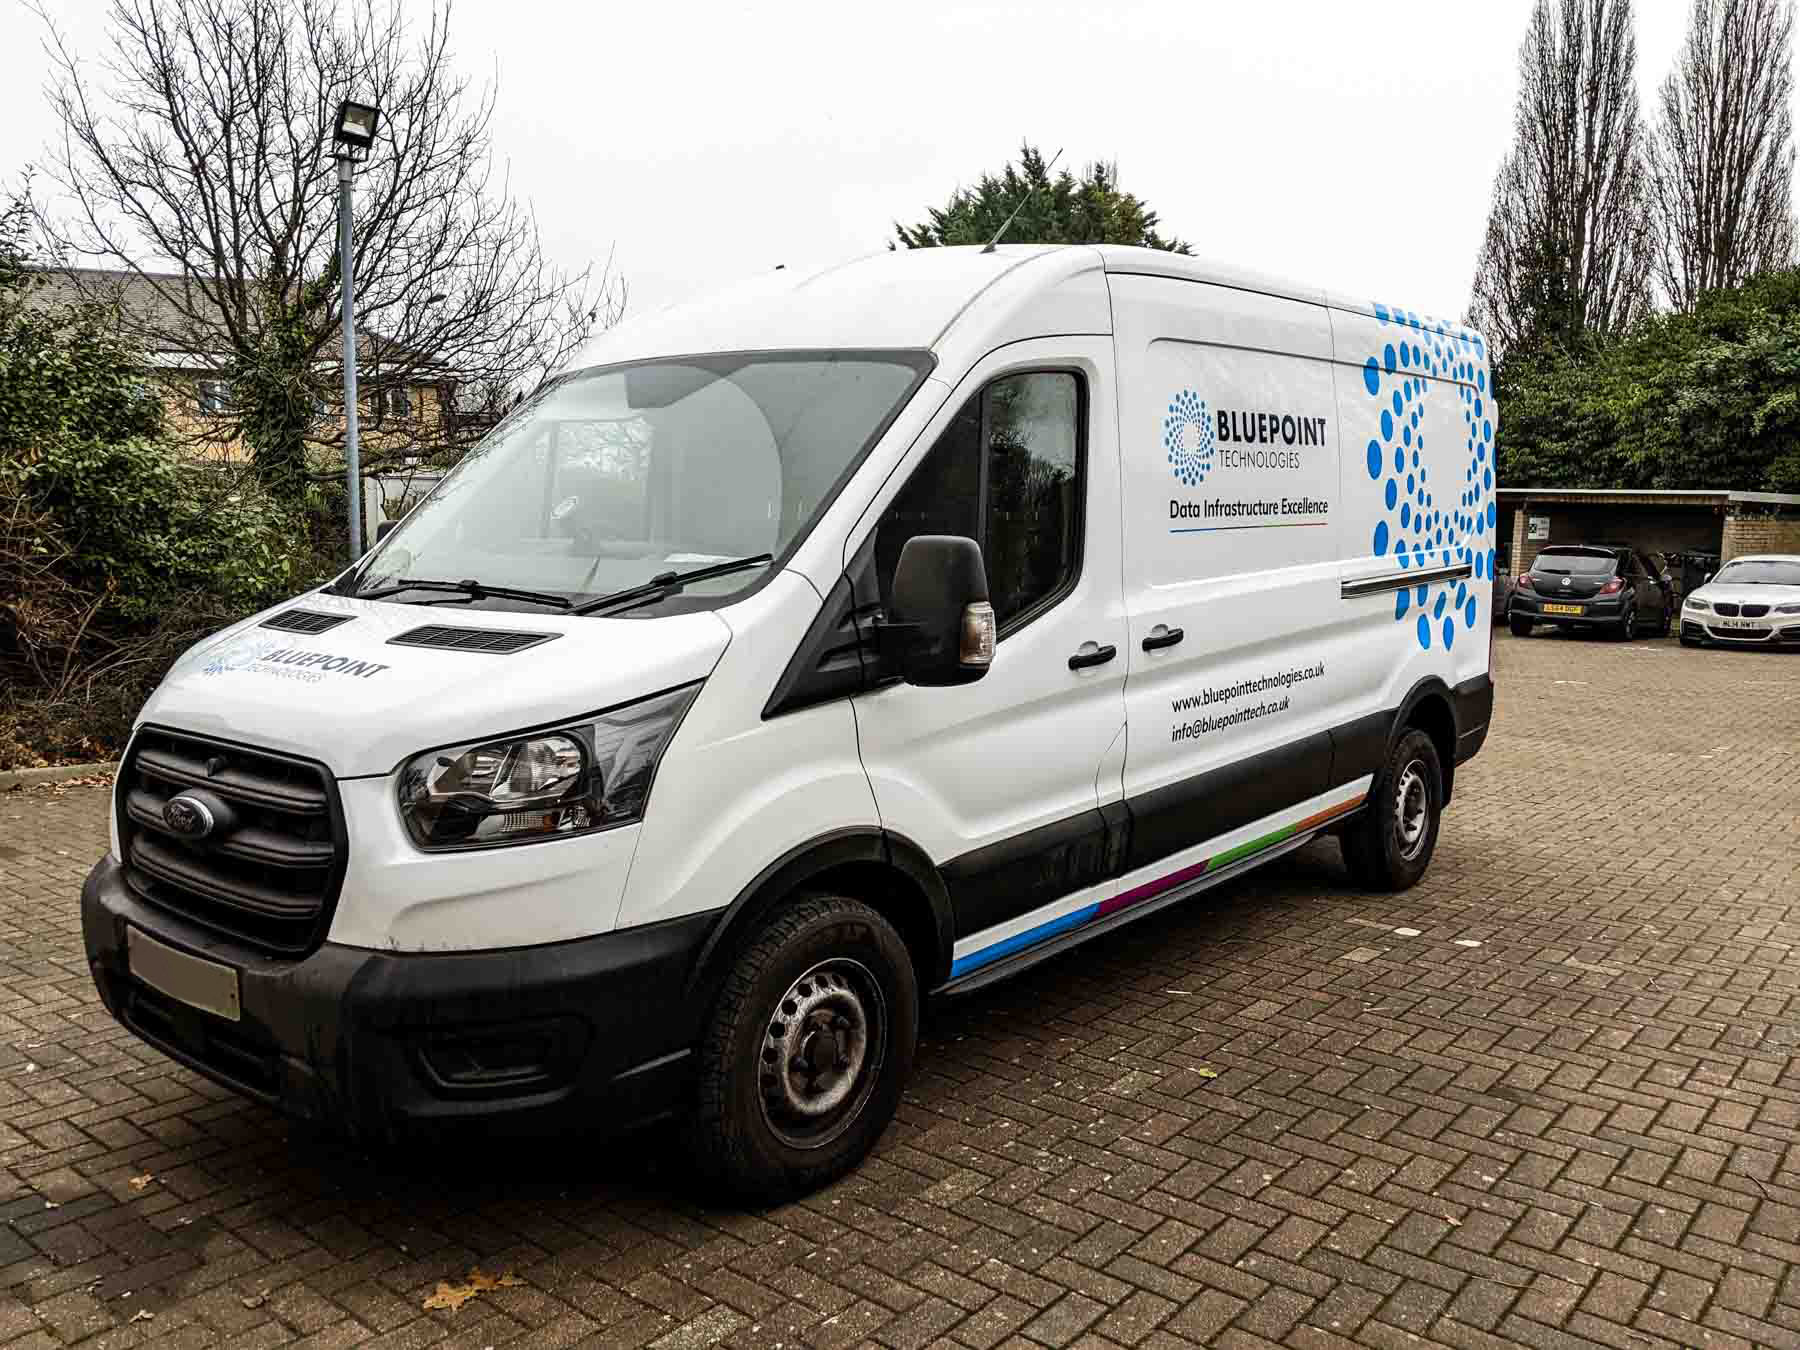 New van the latest infrastructure investment at Bluepoint Technologies